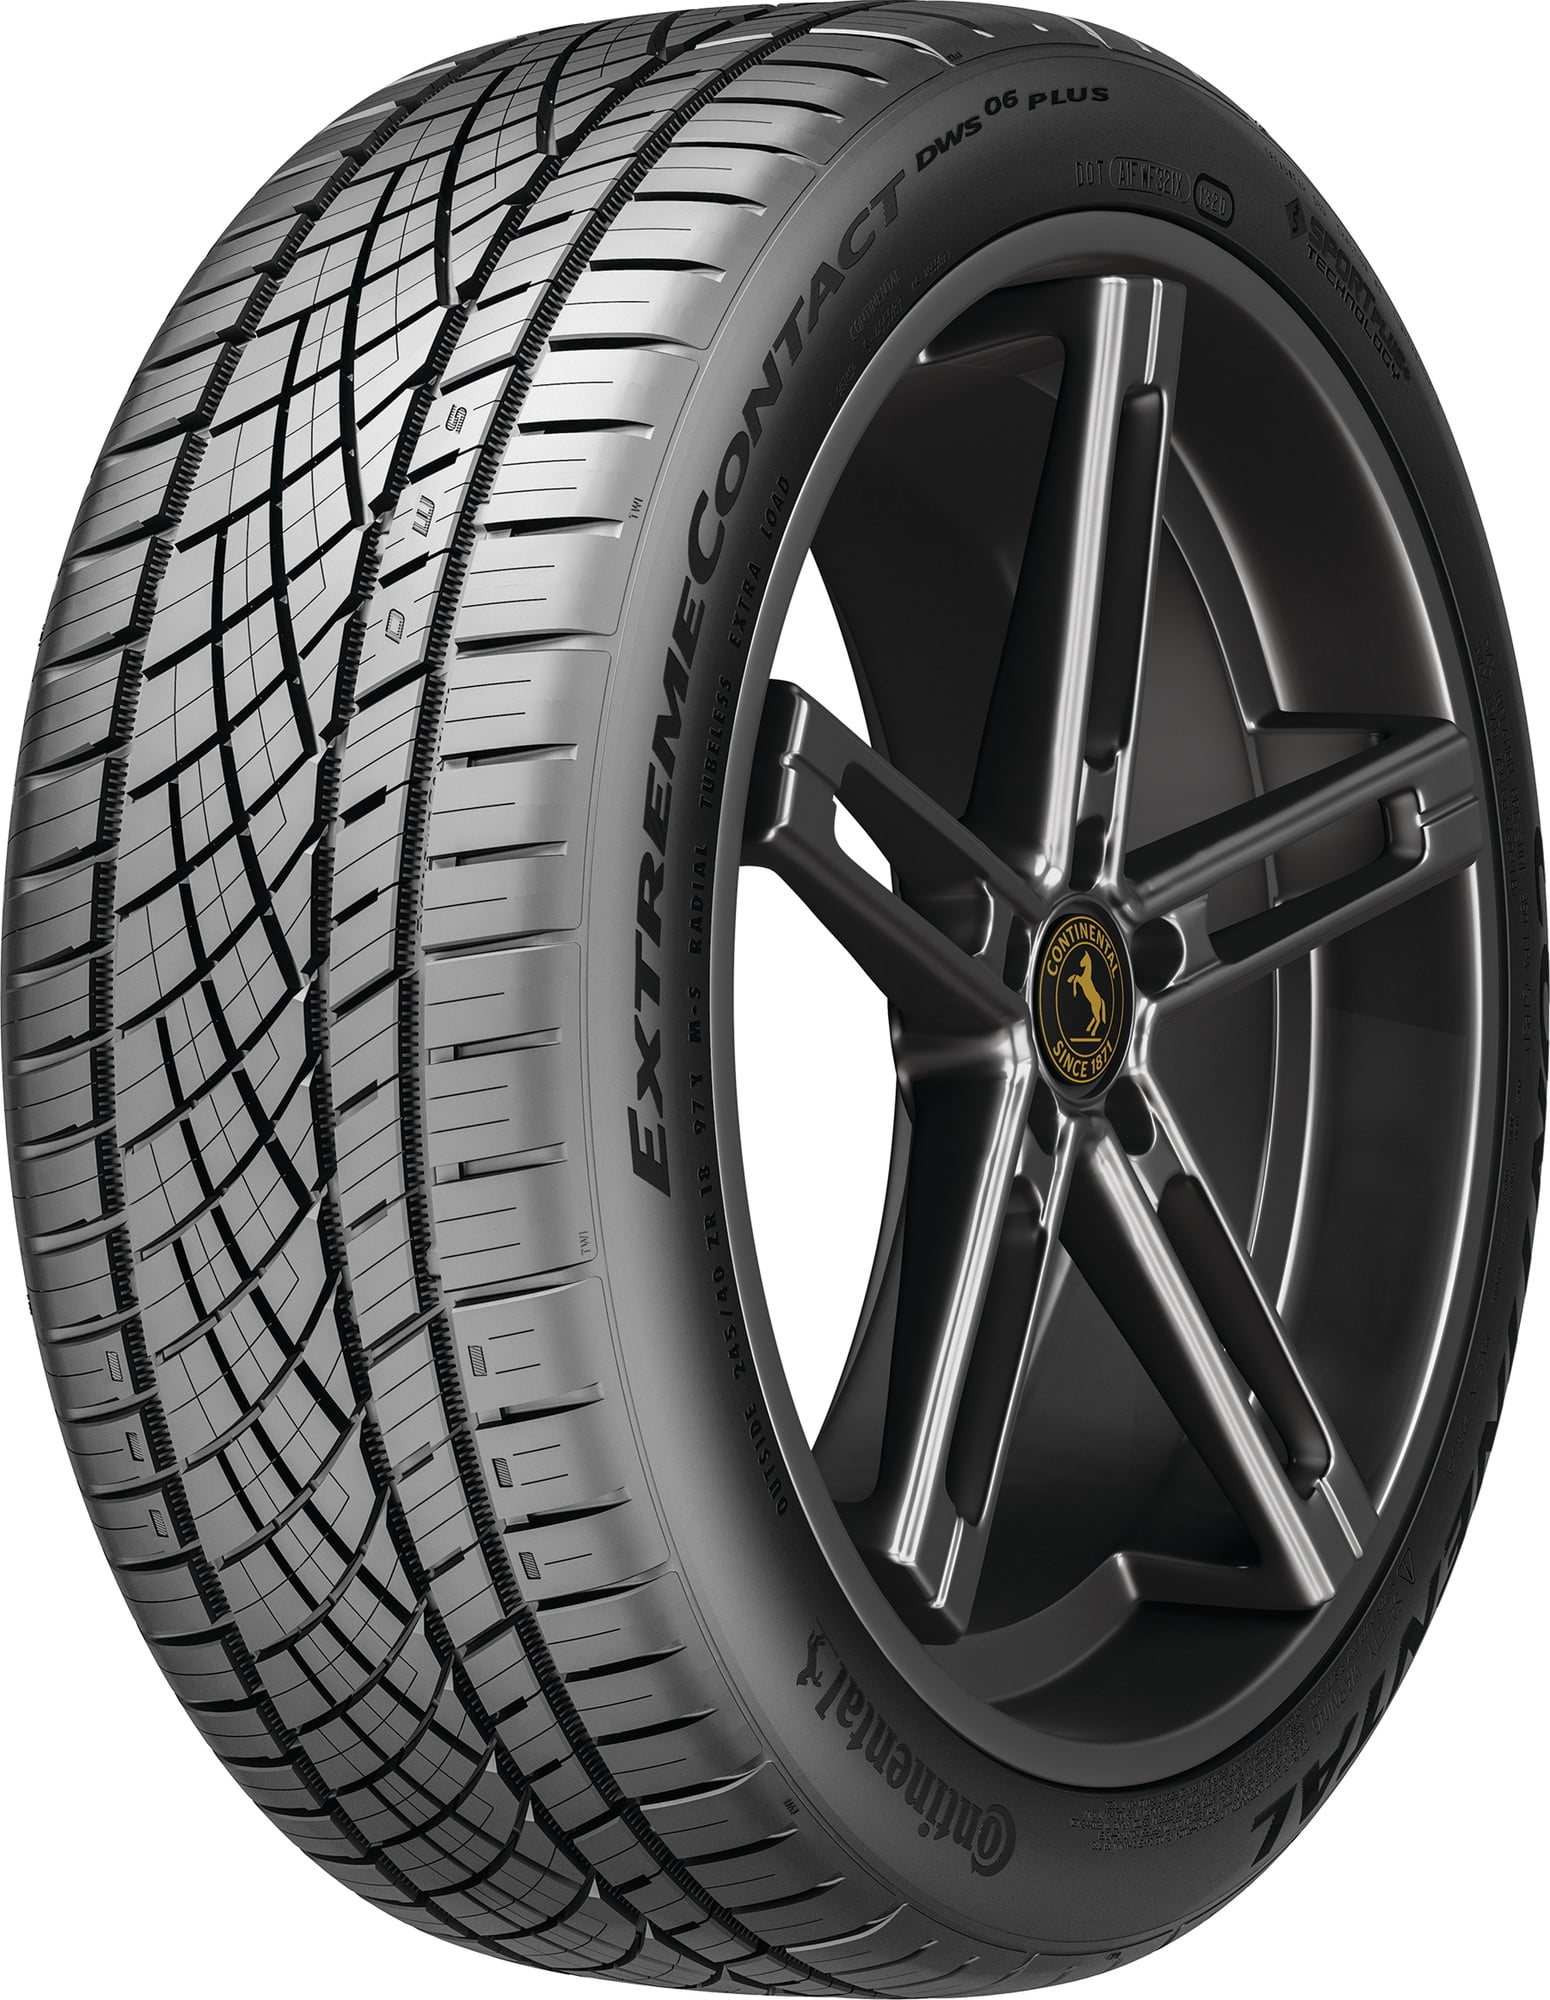 Tire Season 315/35ZR22 XL 111Y DWS06 Passenger PLUS Continental All ExtremeContact UHP